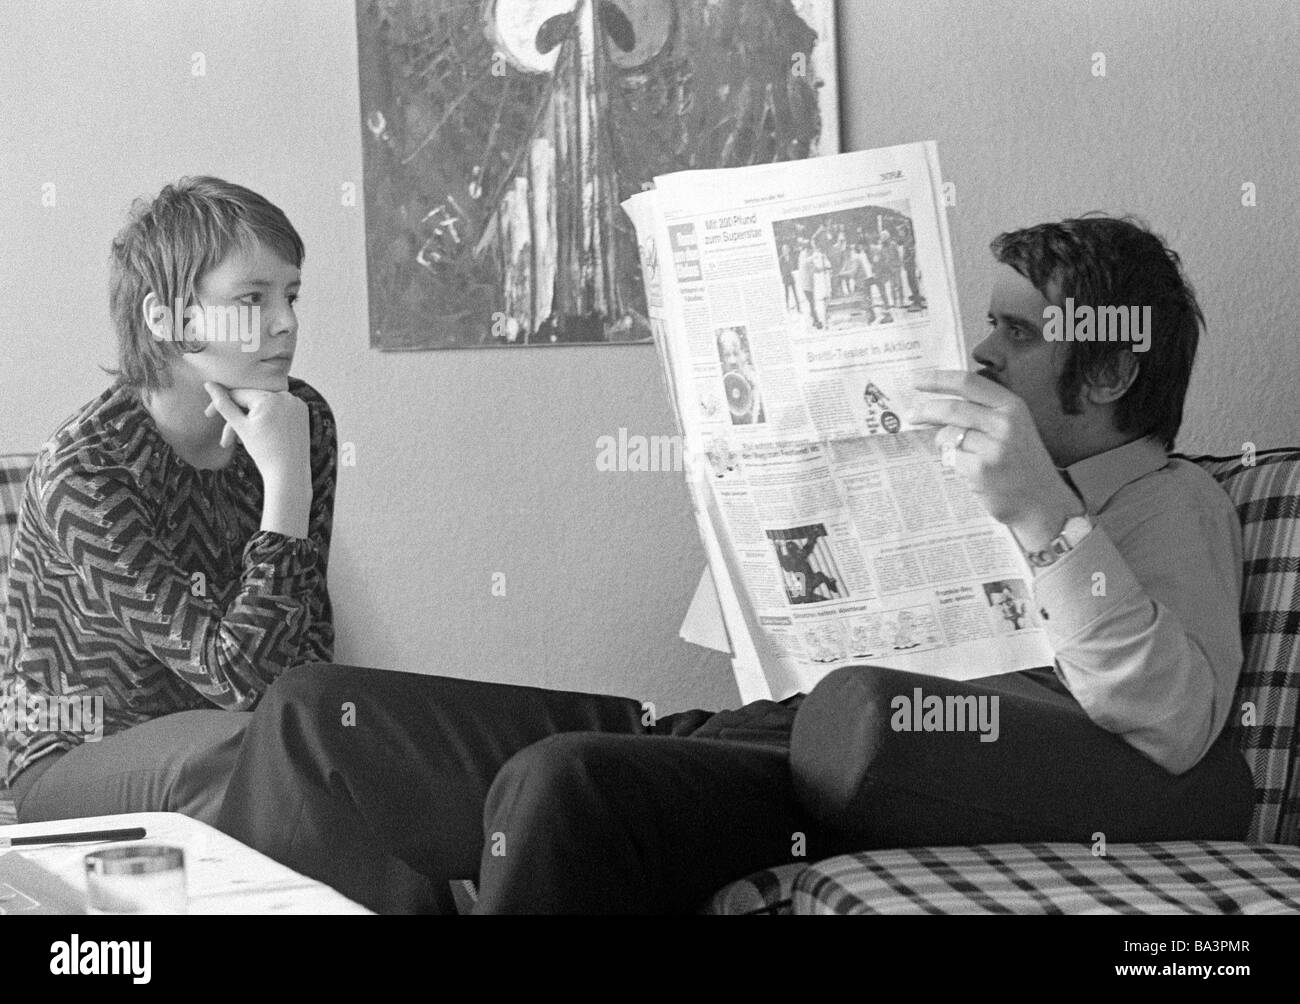 Seventies, black and white photo, people, young couple sitting in the living room, the man reads a newspaper and ignores the woman, the woman looks very disappointed, aged 20 to 30 years, Monika, Peter Stock Photo